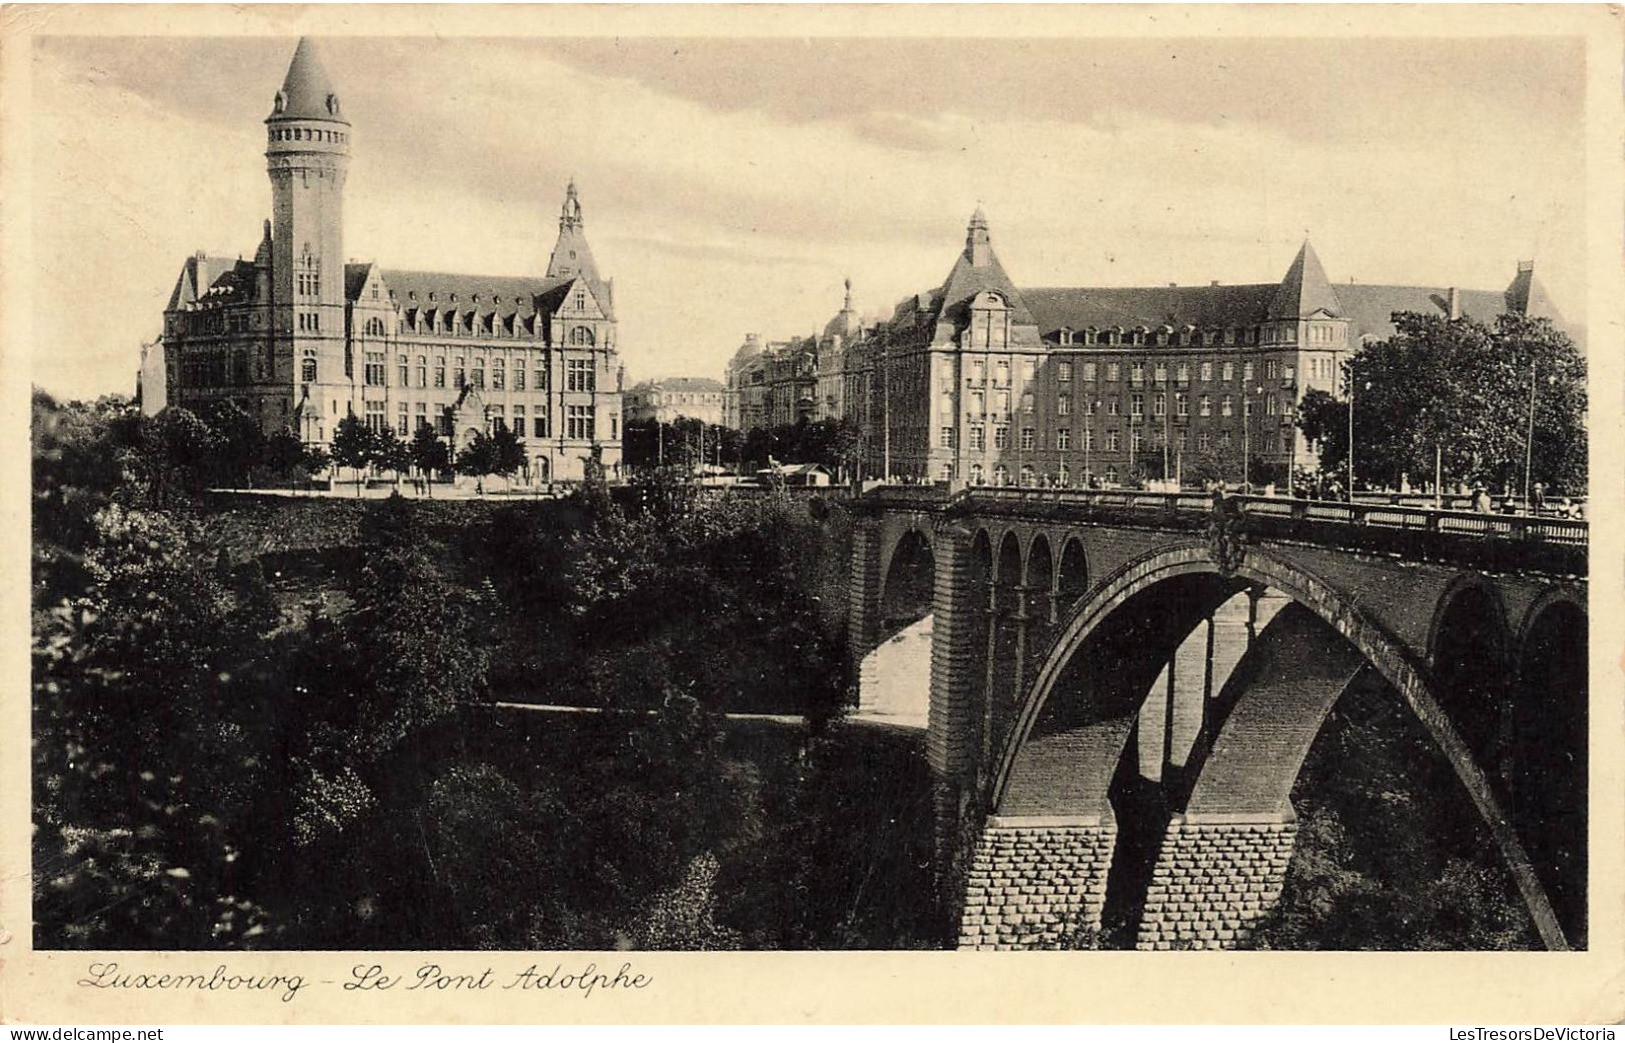 LUXEMBOURG - Luxembourg Ville - Le Pont Adolphe - Carte Postale Ancienne - Luxemburg - Stad